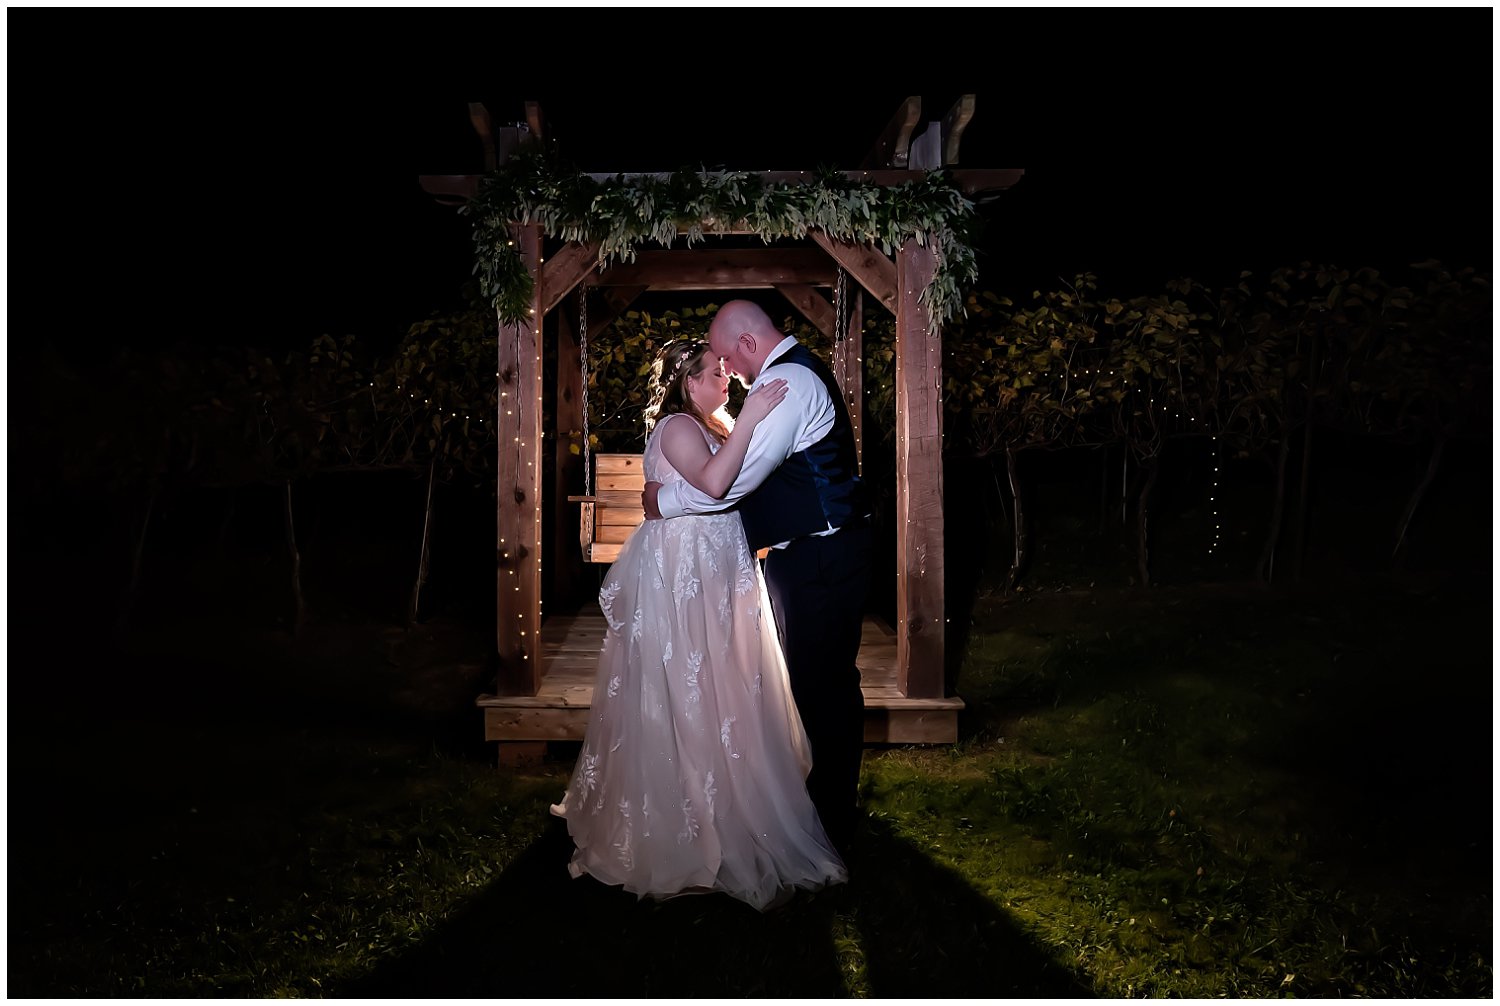 The bride and groom pose during the night for wedding photos at Bent Ridge Winery in NS.